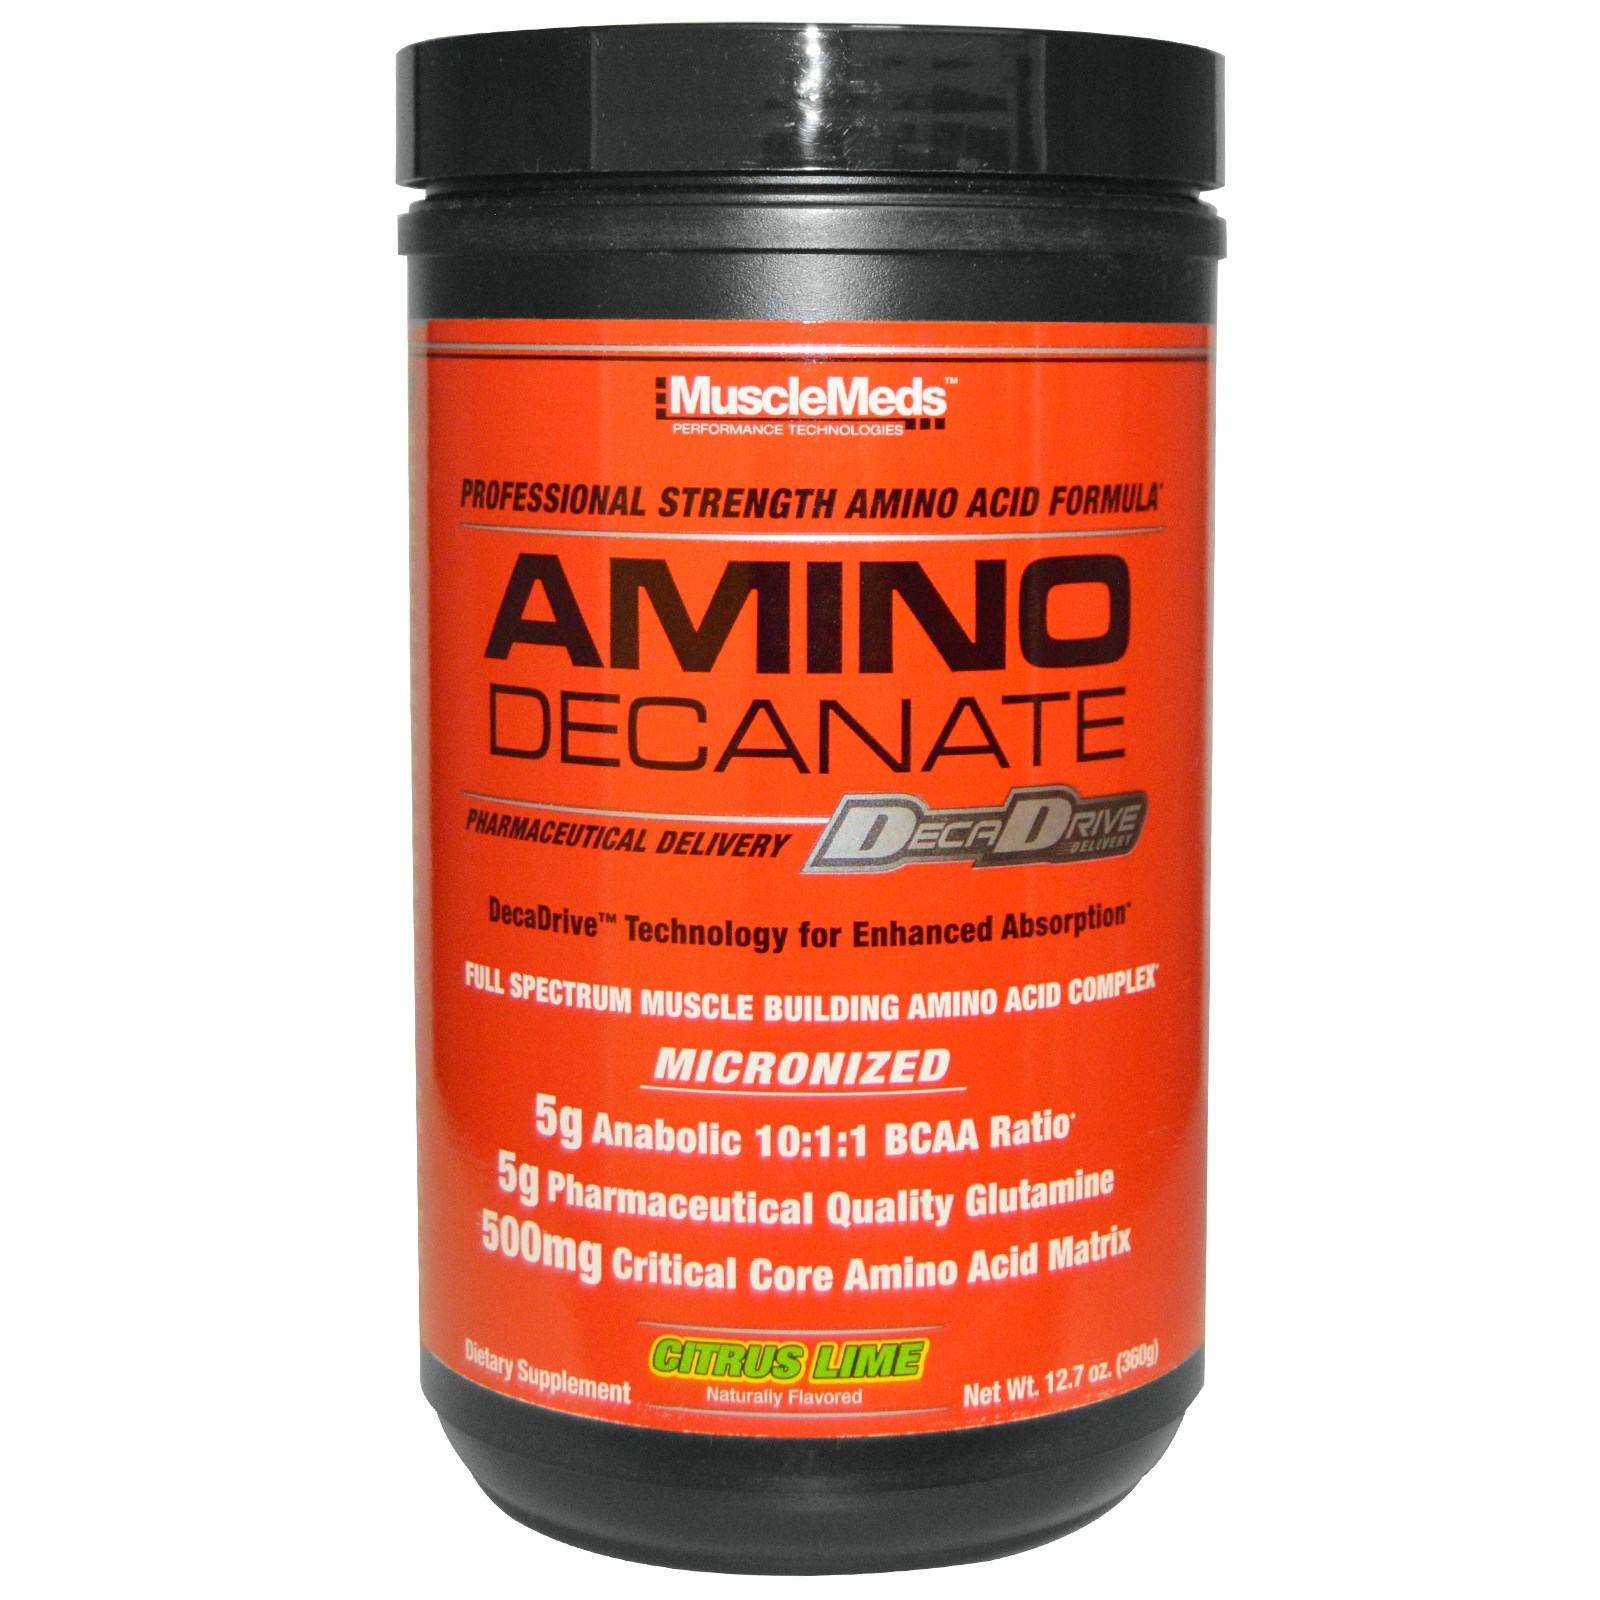 MuscleMeds AMINO DECANATE